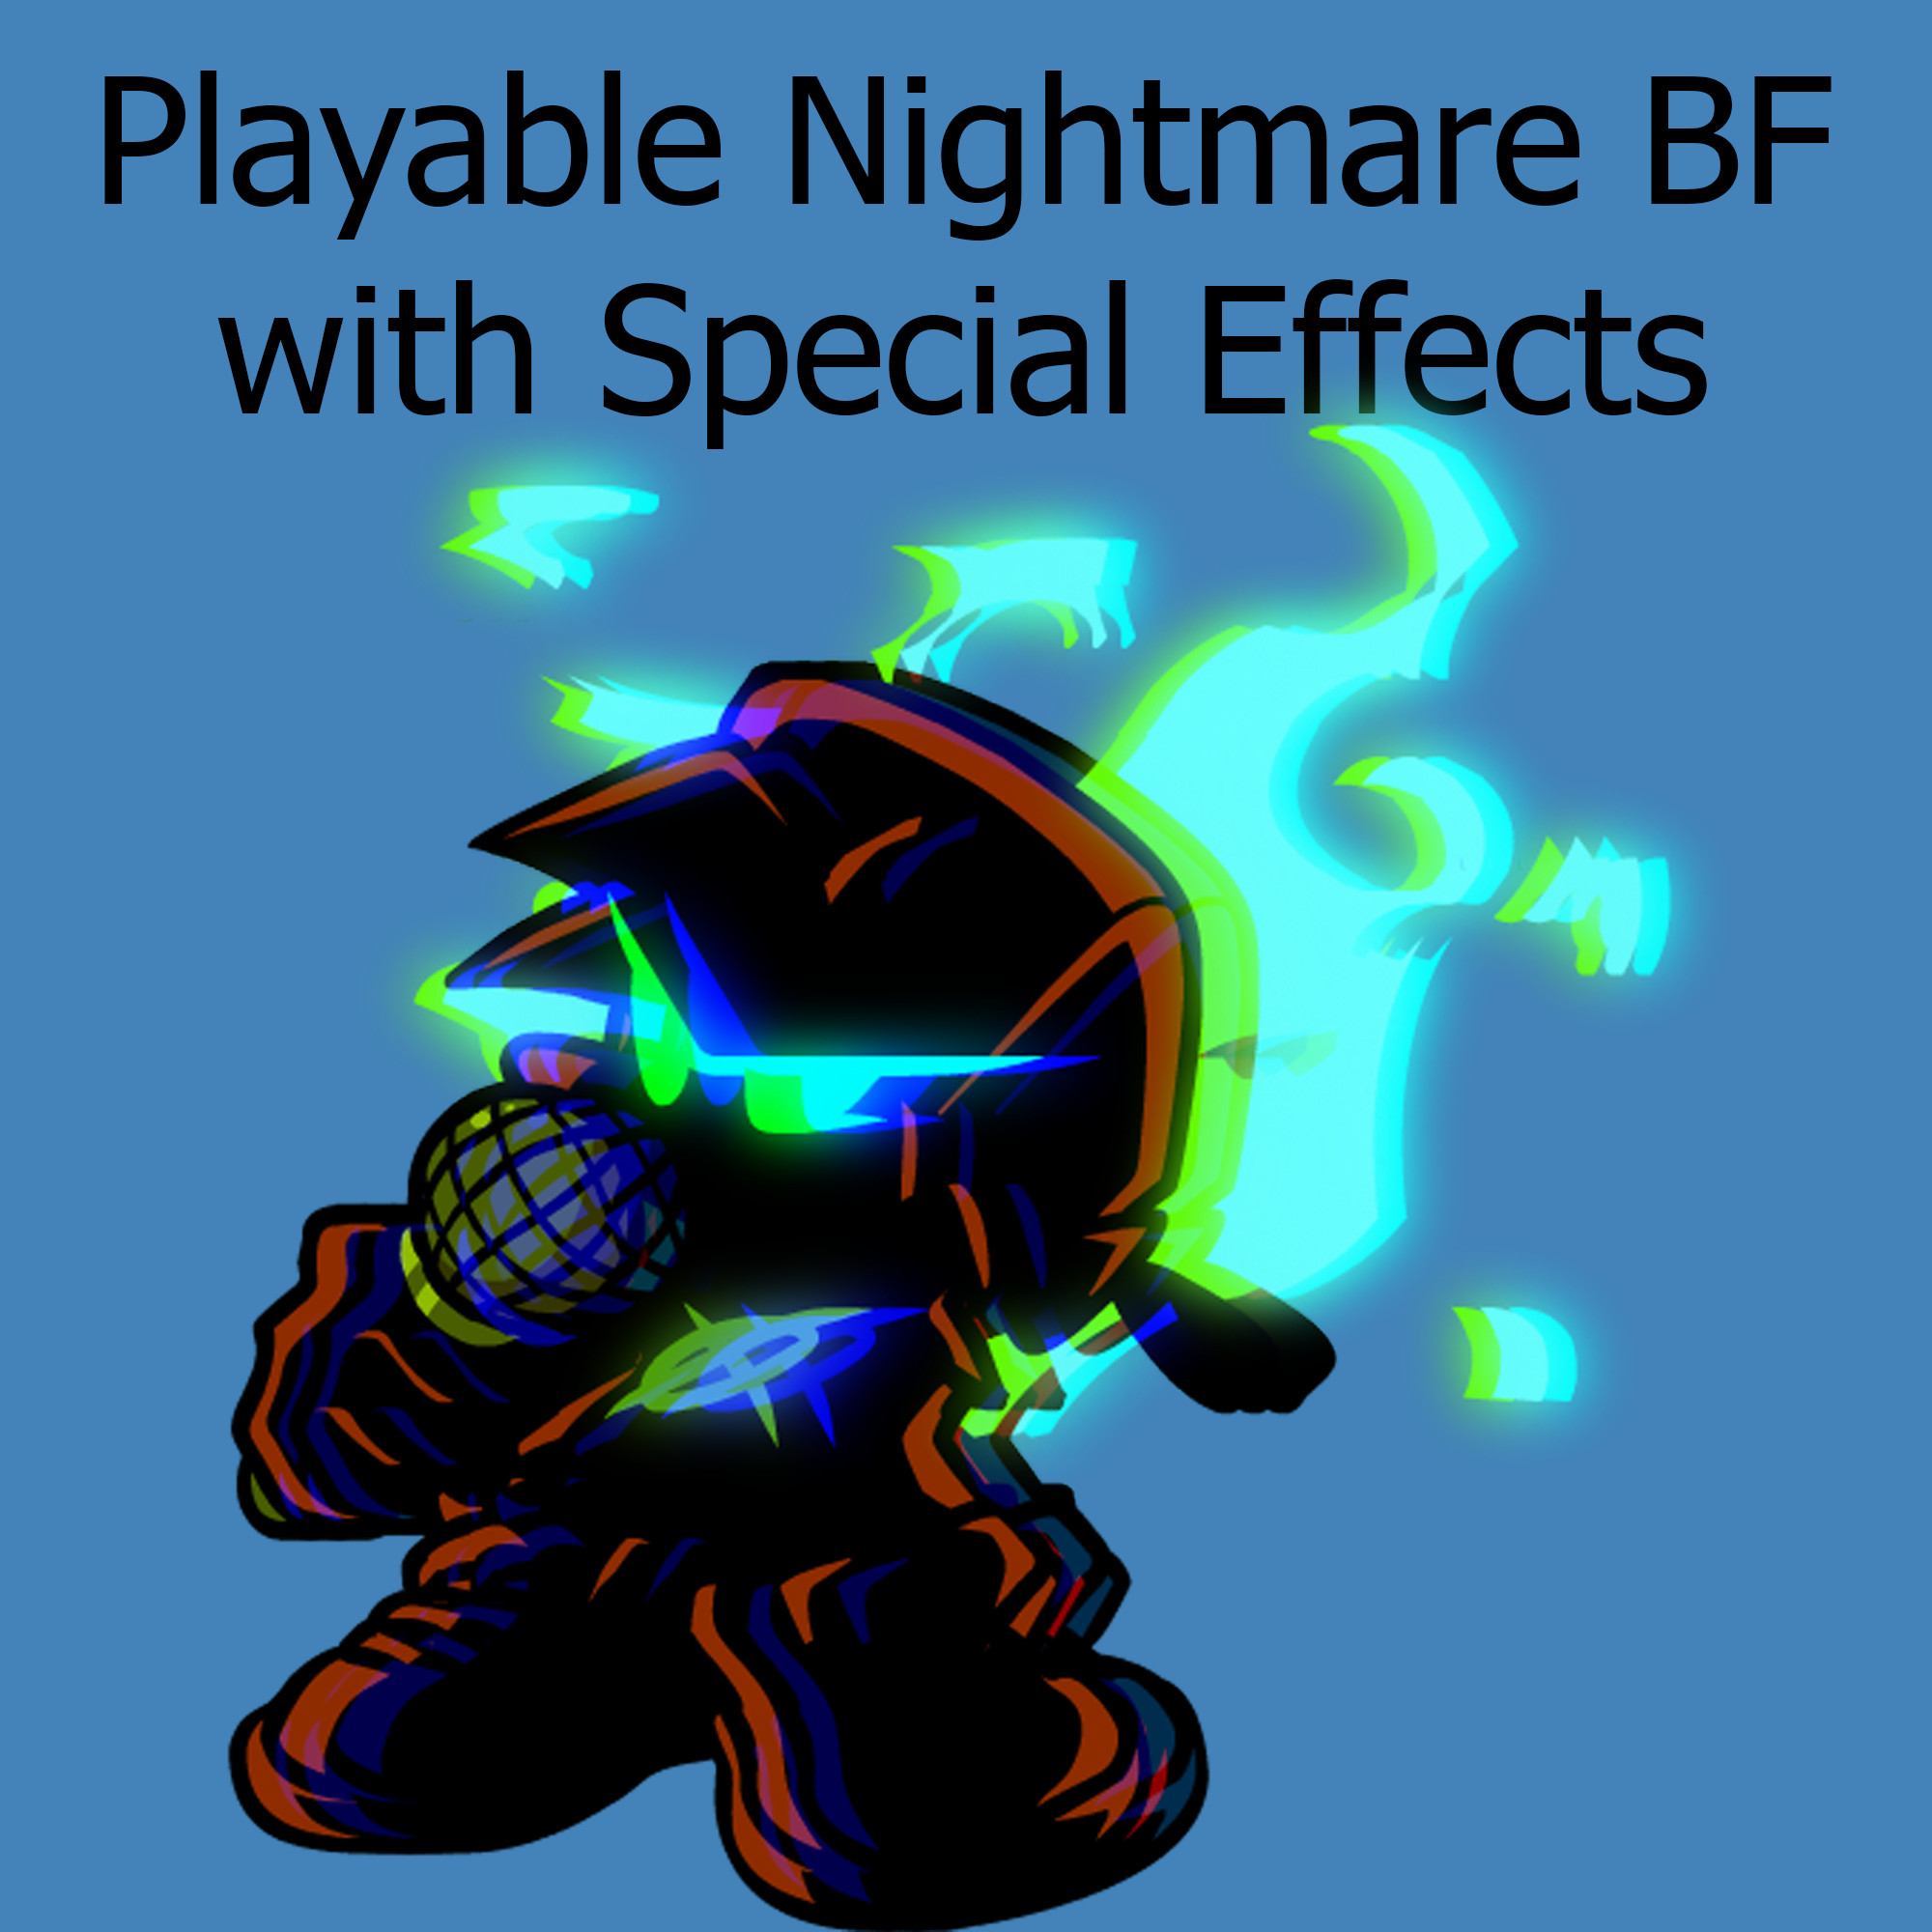 Playable Nightmare BF (with some special effects) [Friday Night Funkin'] [ Mods]